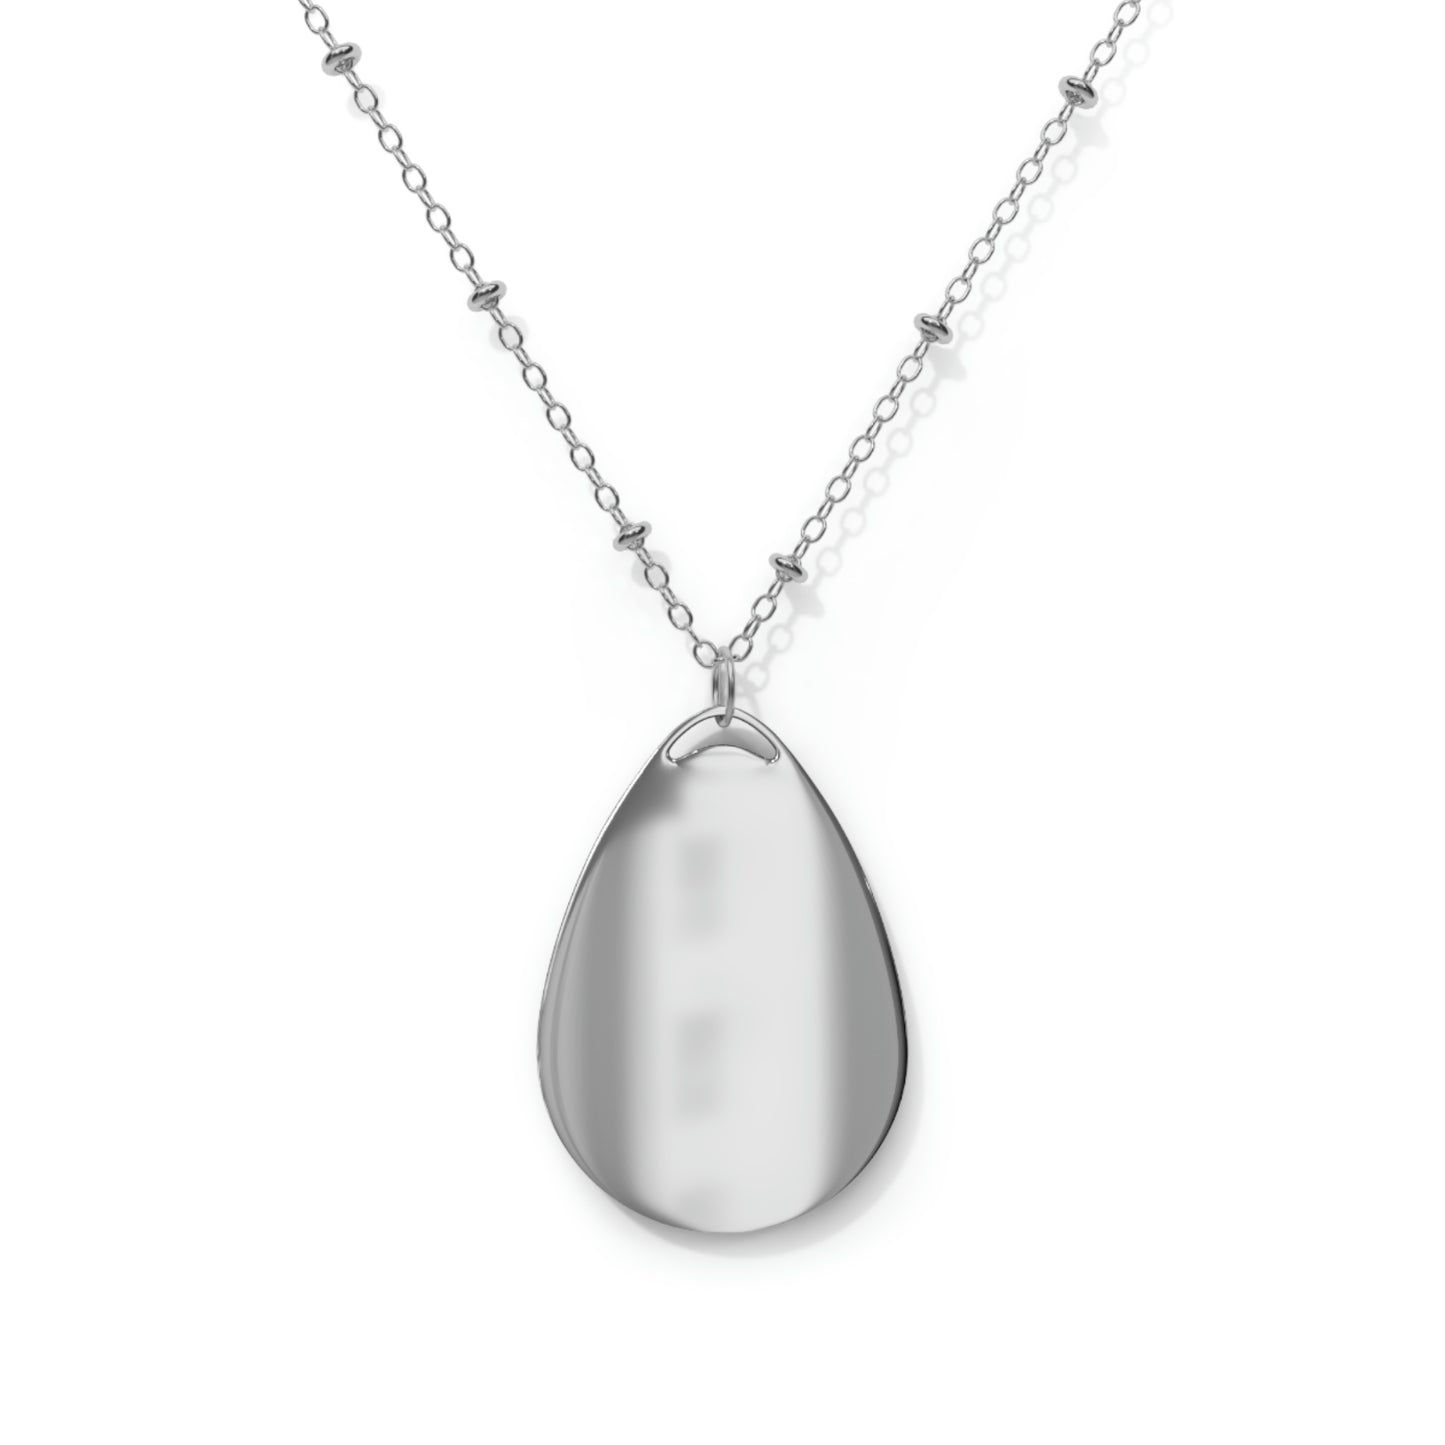 North Georgia Solitaries Oval Necklace